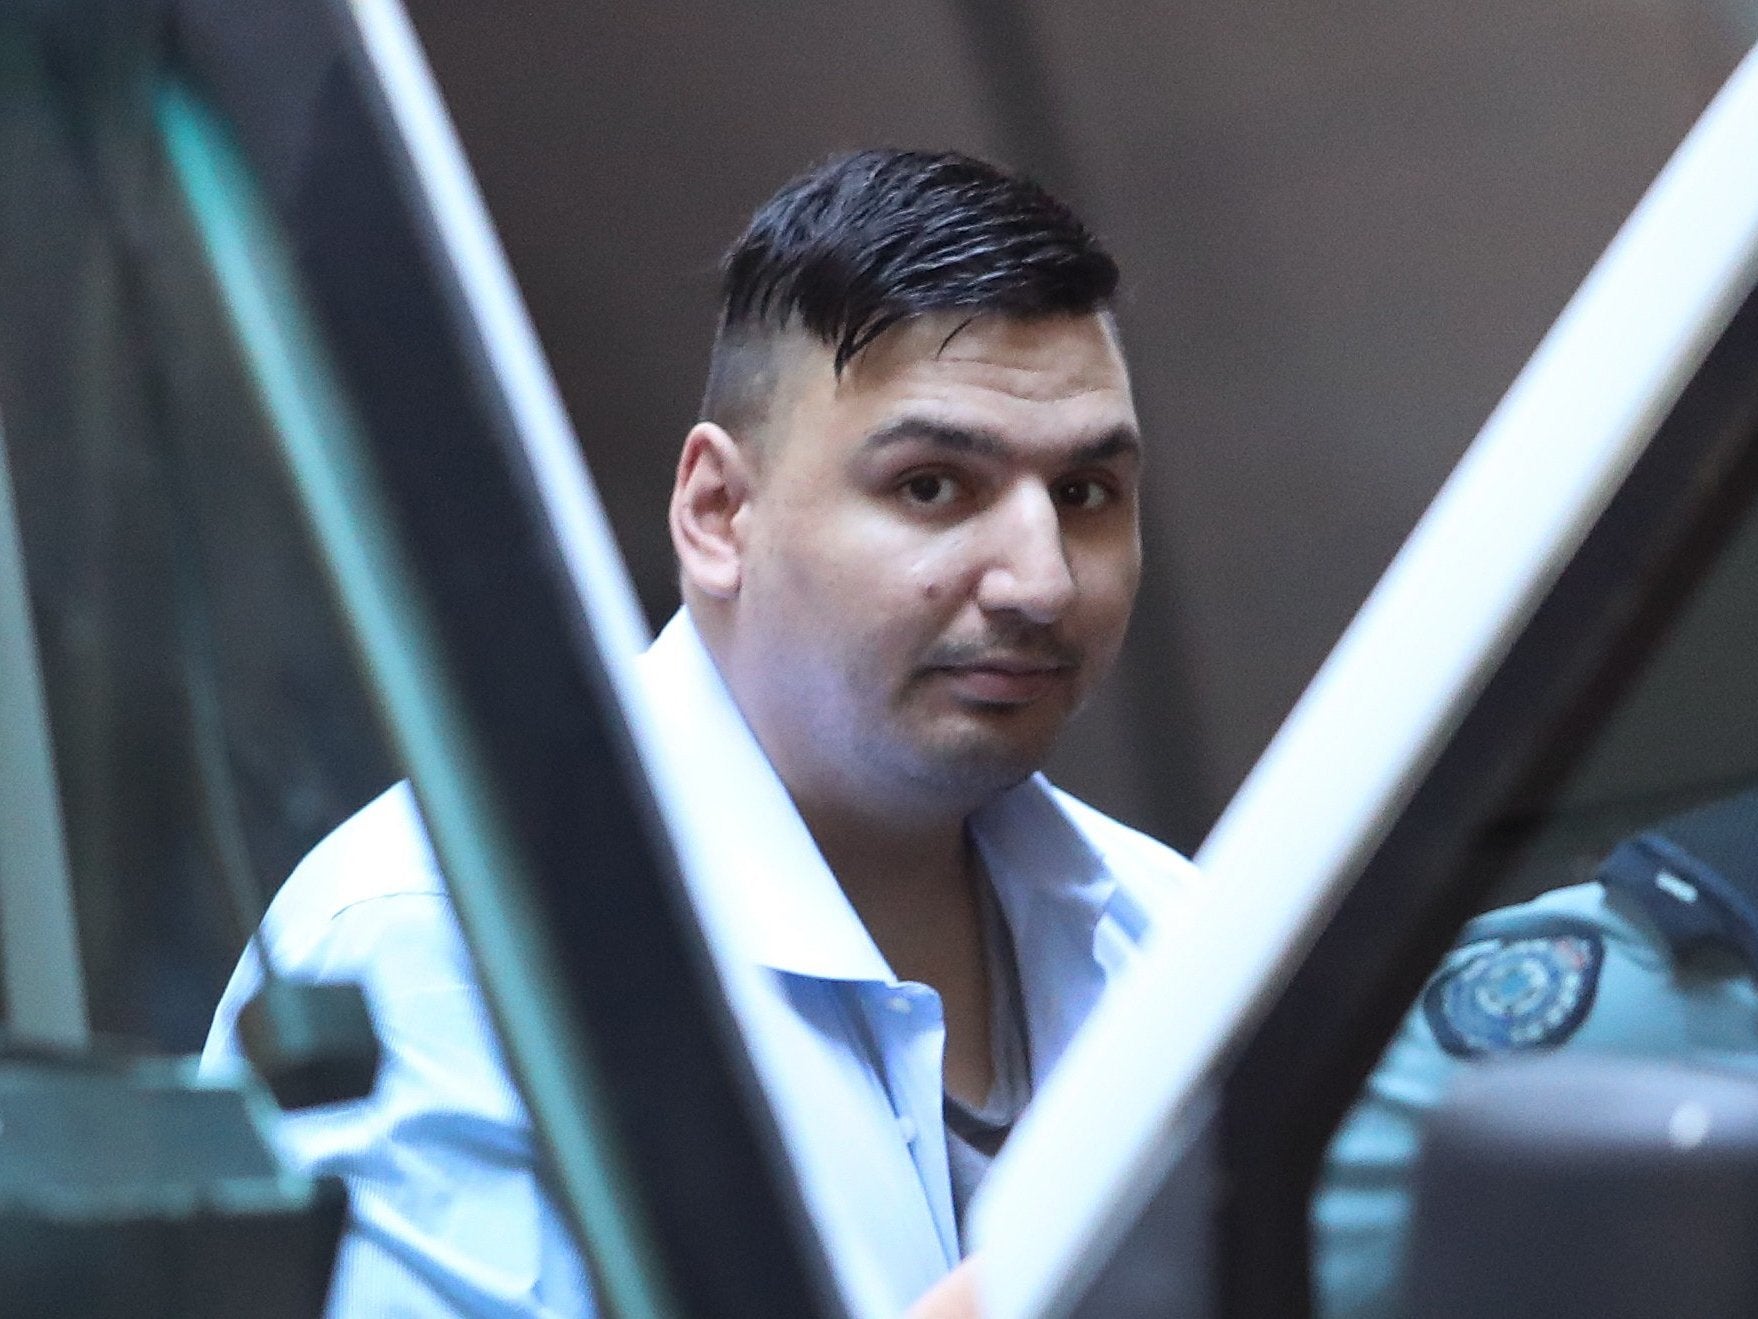 James 'Dimitrious' Gargasoulas, 28, is seen arriving at the Victorian Supreme Court in Melbourne